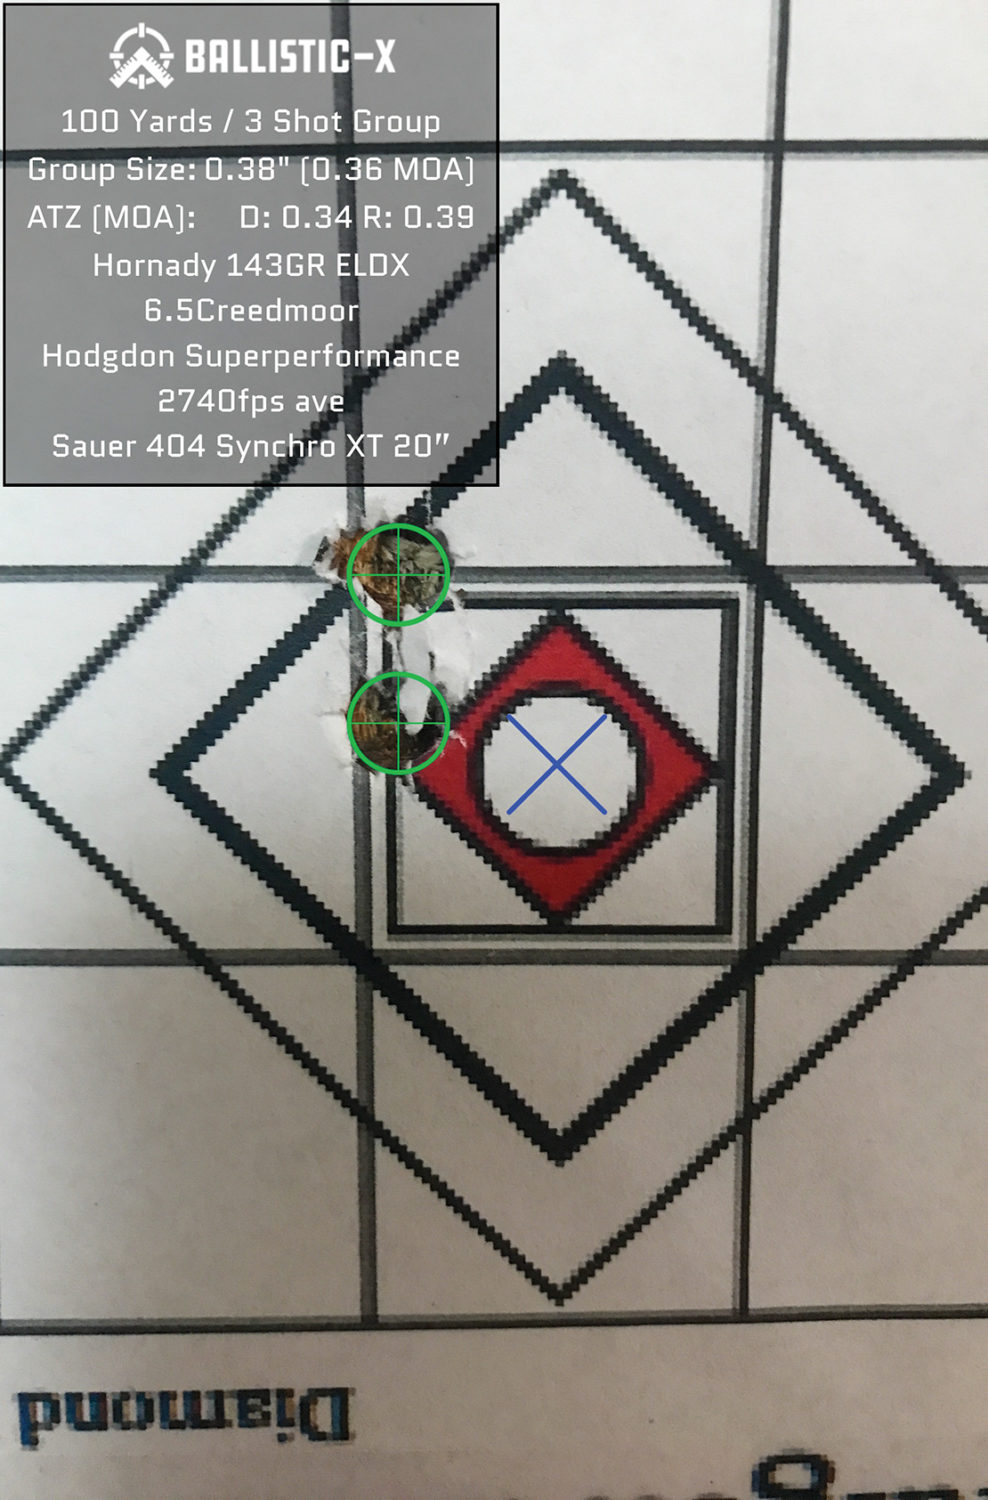 The 143S didn't group as well as the 140s but still fell well under .5 MOA